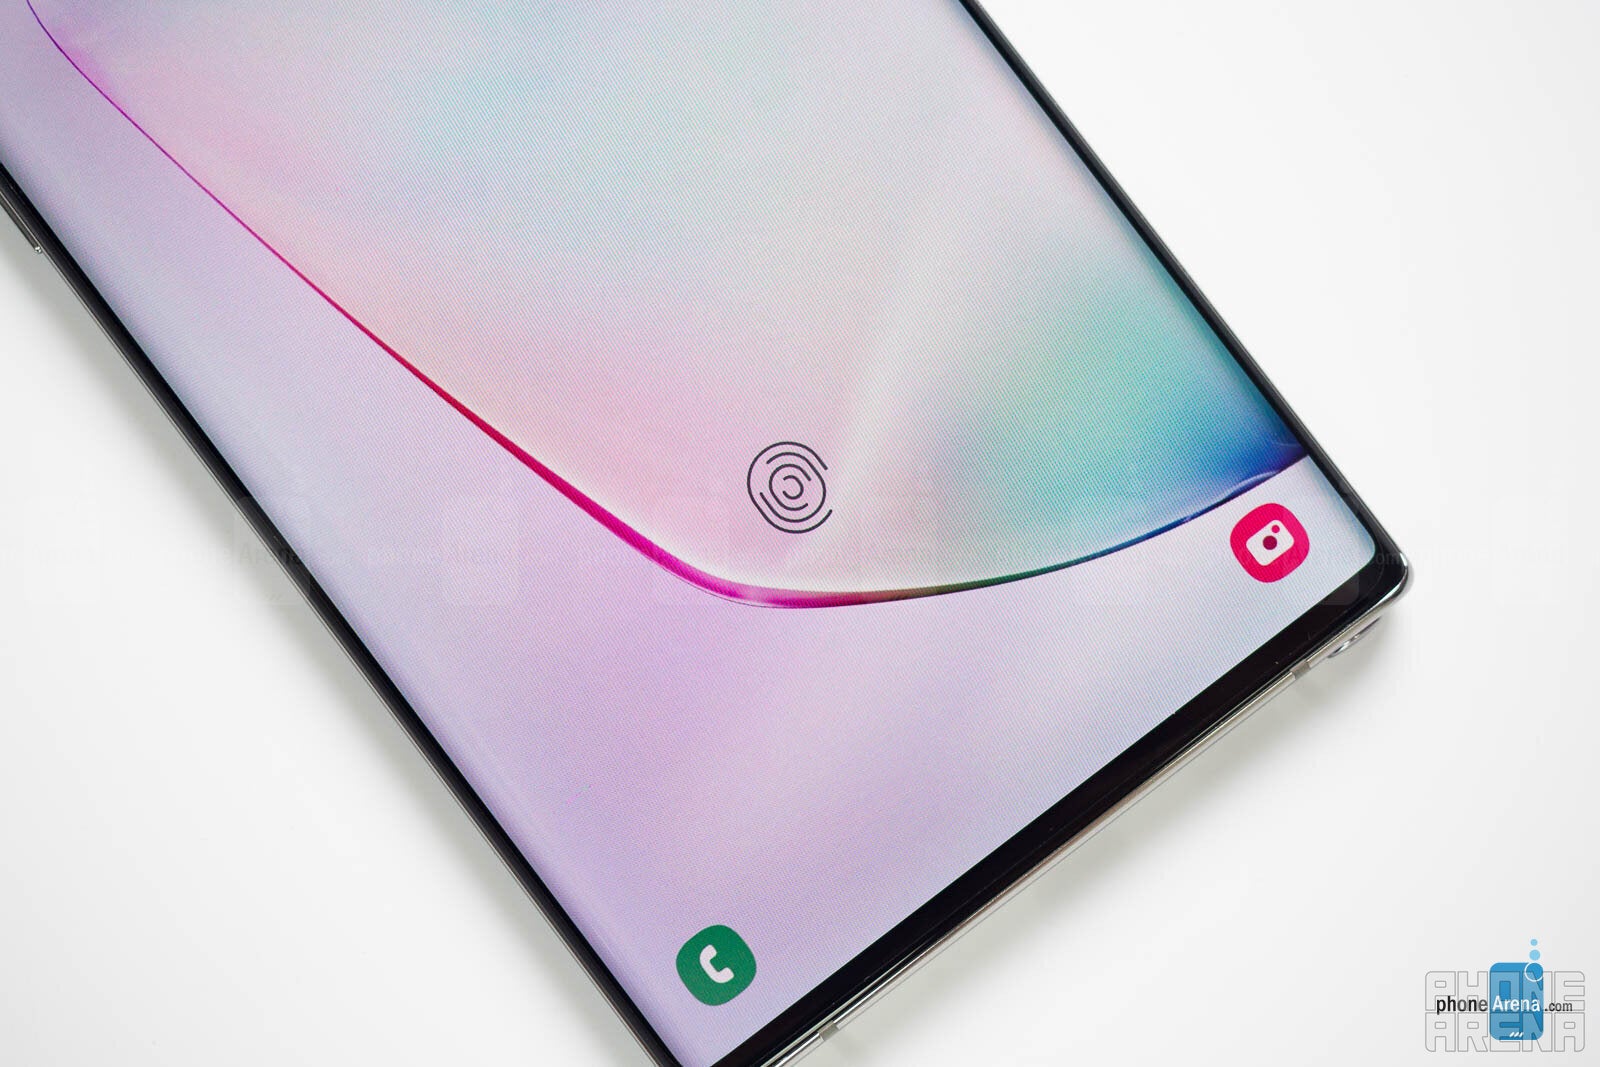 Samsung Galaxy Note 10+: Slick, Buttery Smooth & Still Feels New Even After  a Year - Welcome to the New Samsung! - Counterpoint